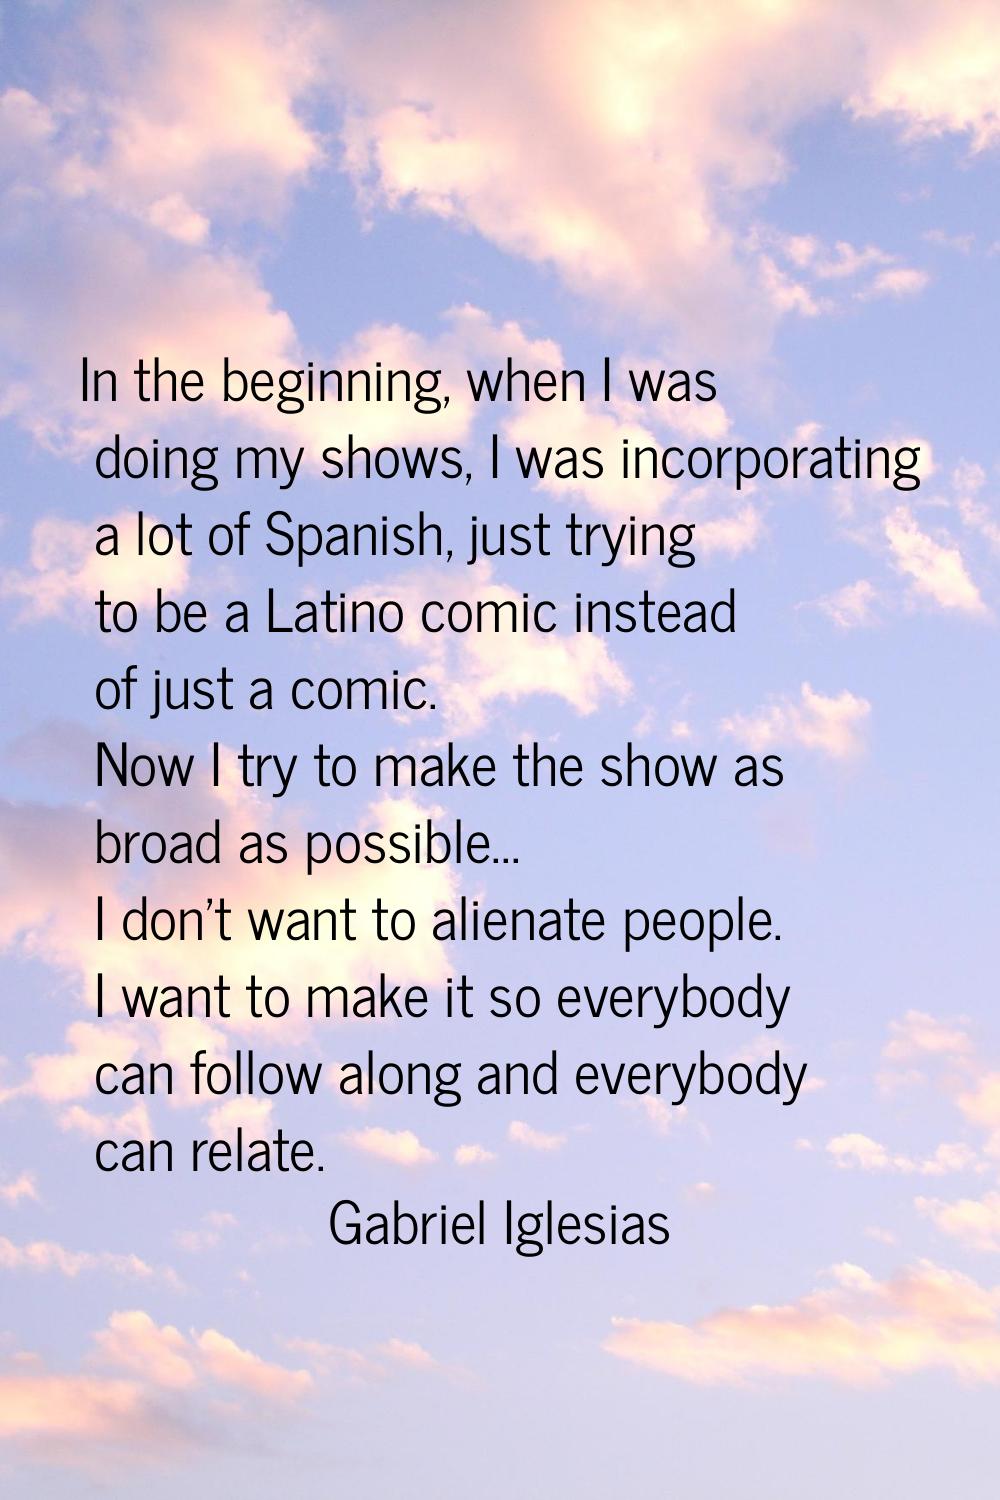 In the beginning, when I was doing my shows, I was incorporating a lot of Spanish, just trying to b